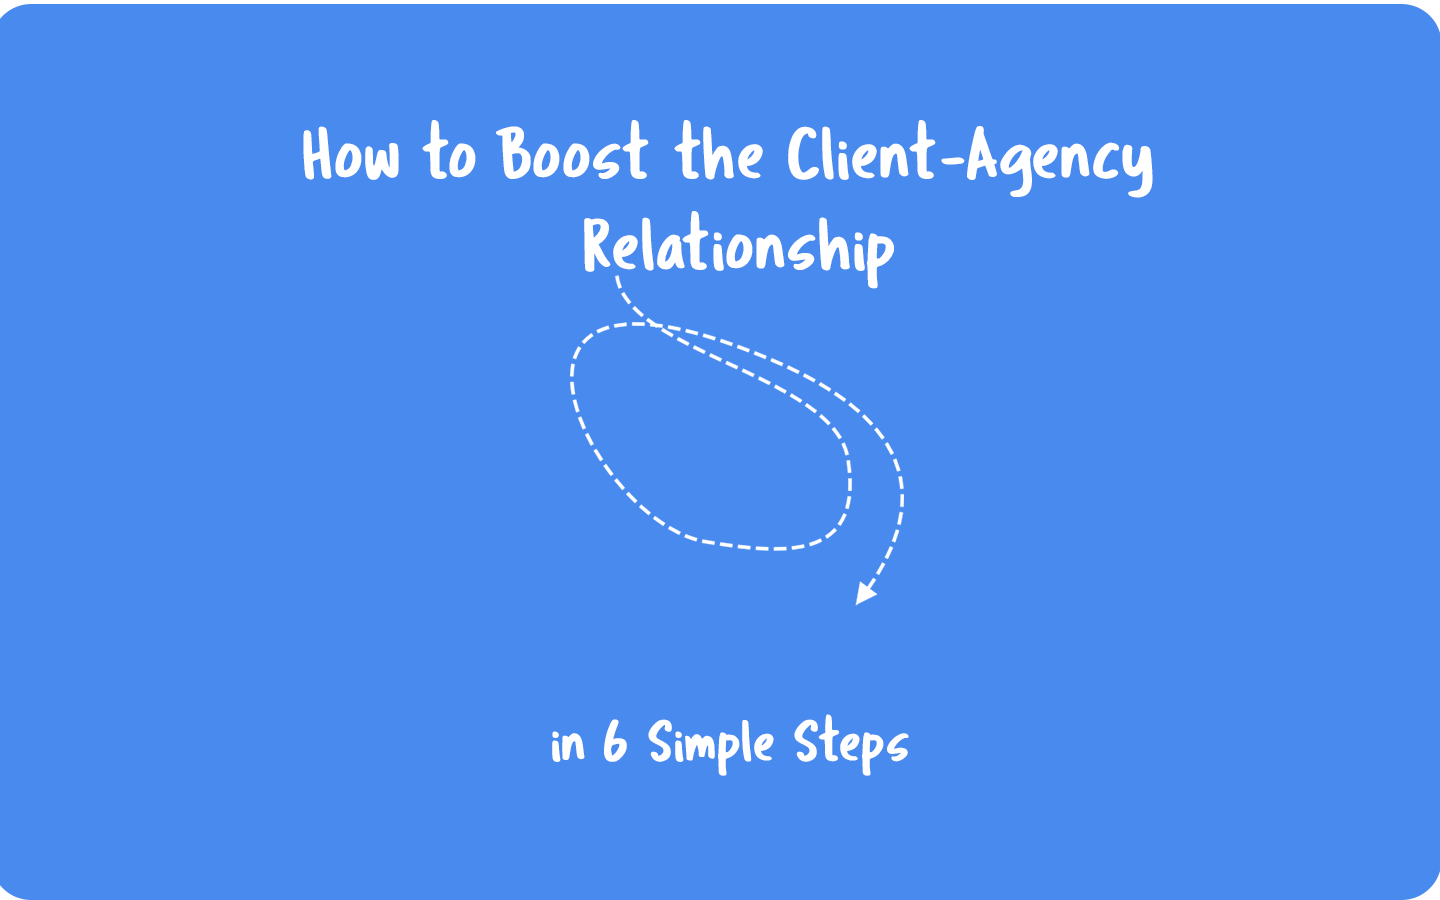 client-agency relationship